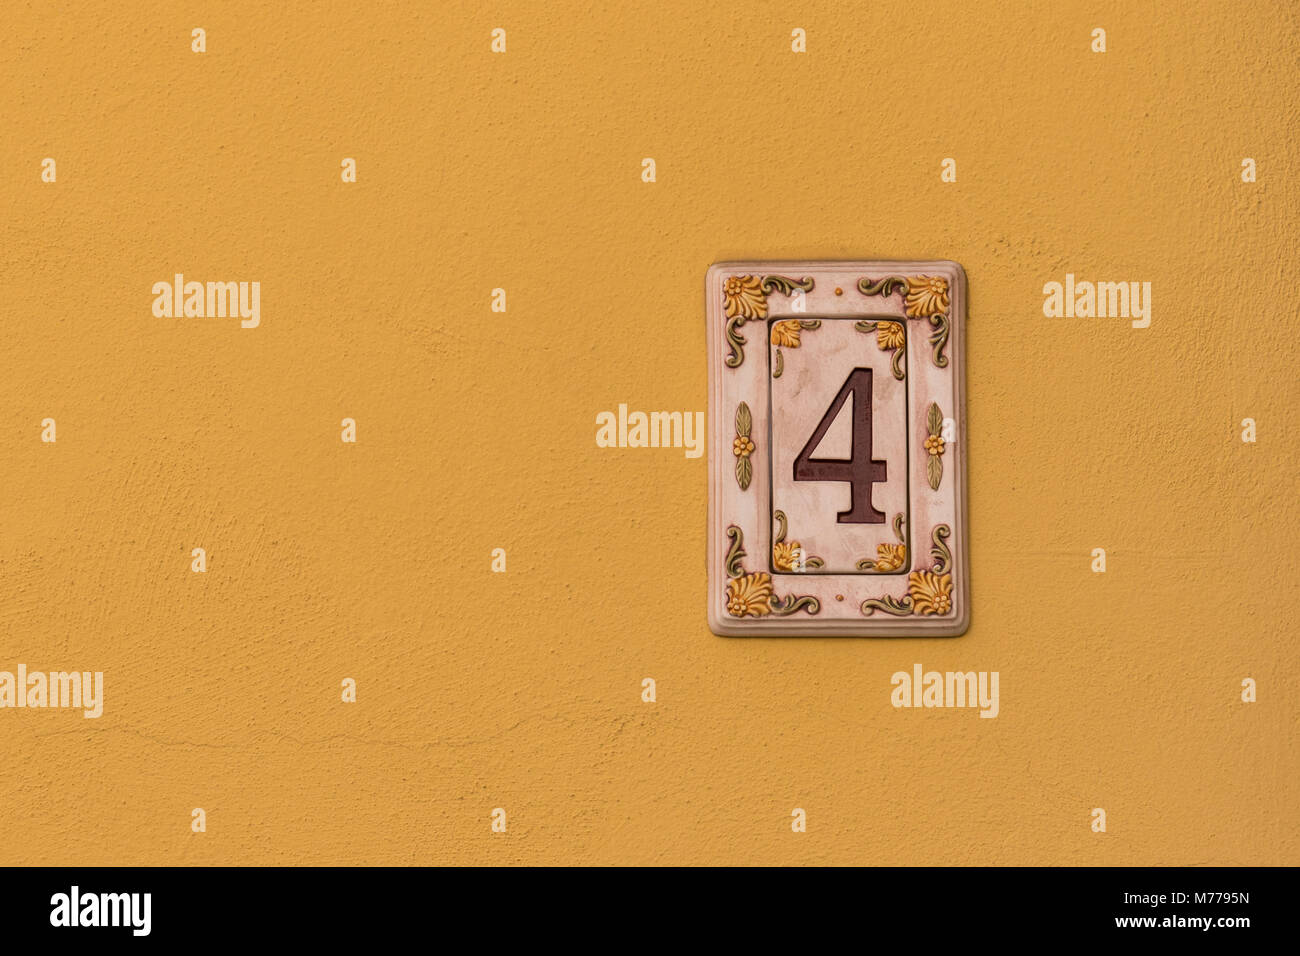 Ceramic house number 4 on yellow wall Stock Photo